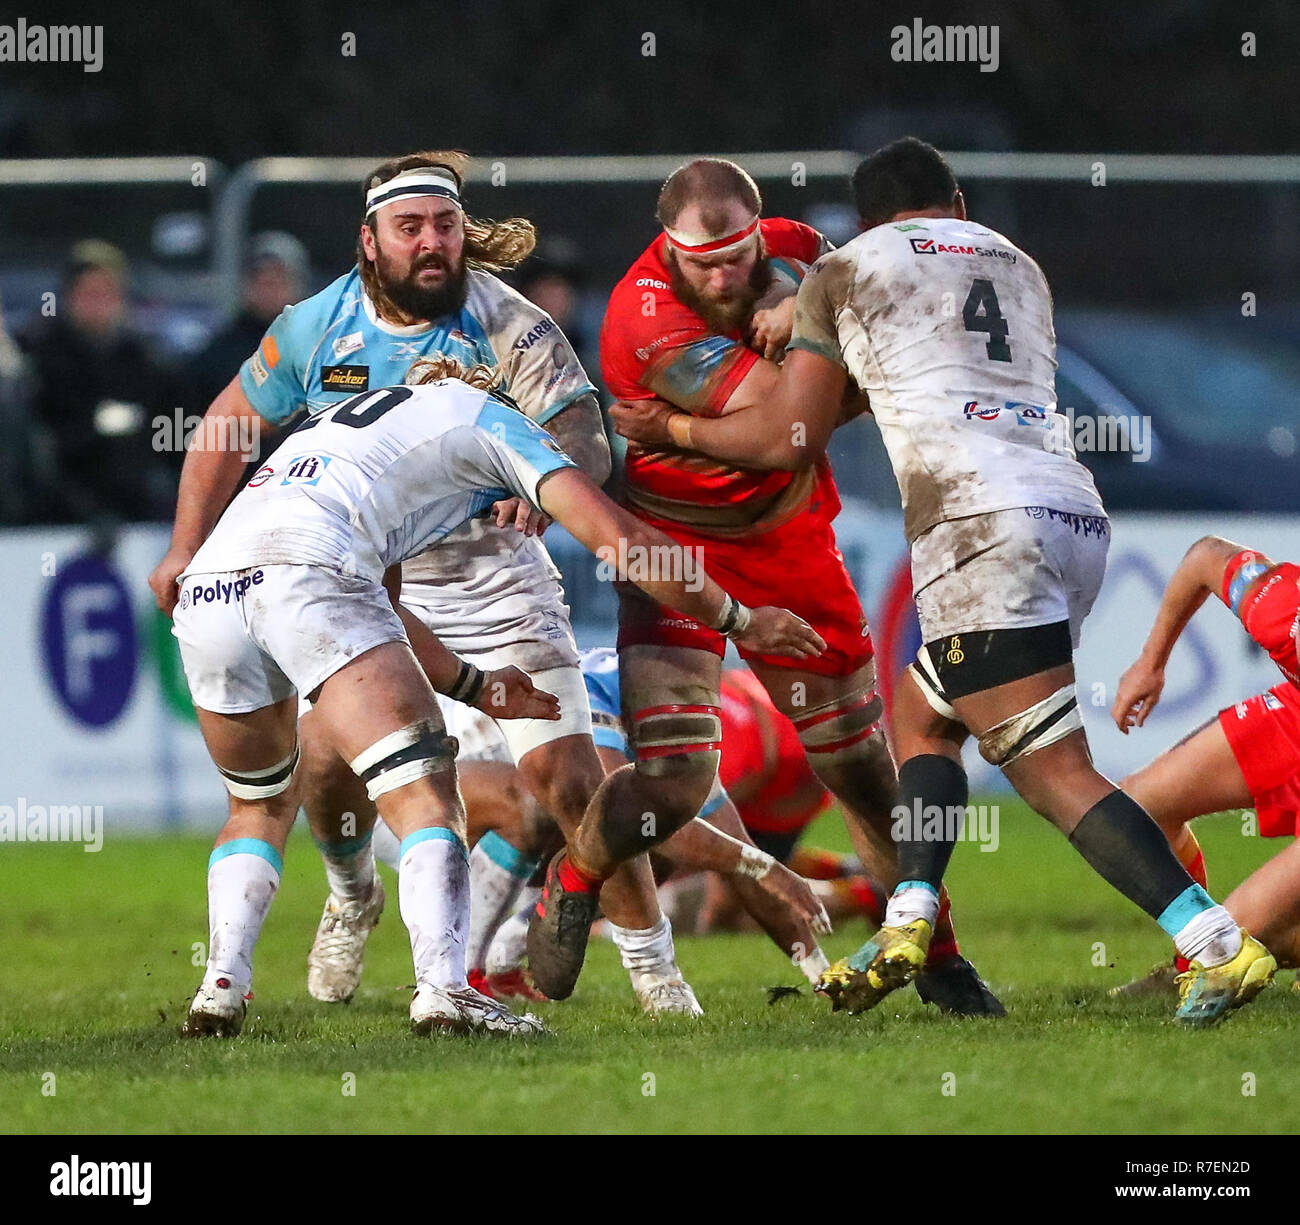 Coventry, UK. 8th December 2018.  George Oram on the charge for Coventry during the Championship Cup match played between Coventry rfc and Doncaster Knights rfc at the Butts Park Arena, Coventry. Credit: Phil Hutchinson/Alamy Live News Stock Photo